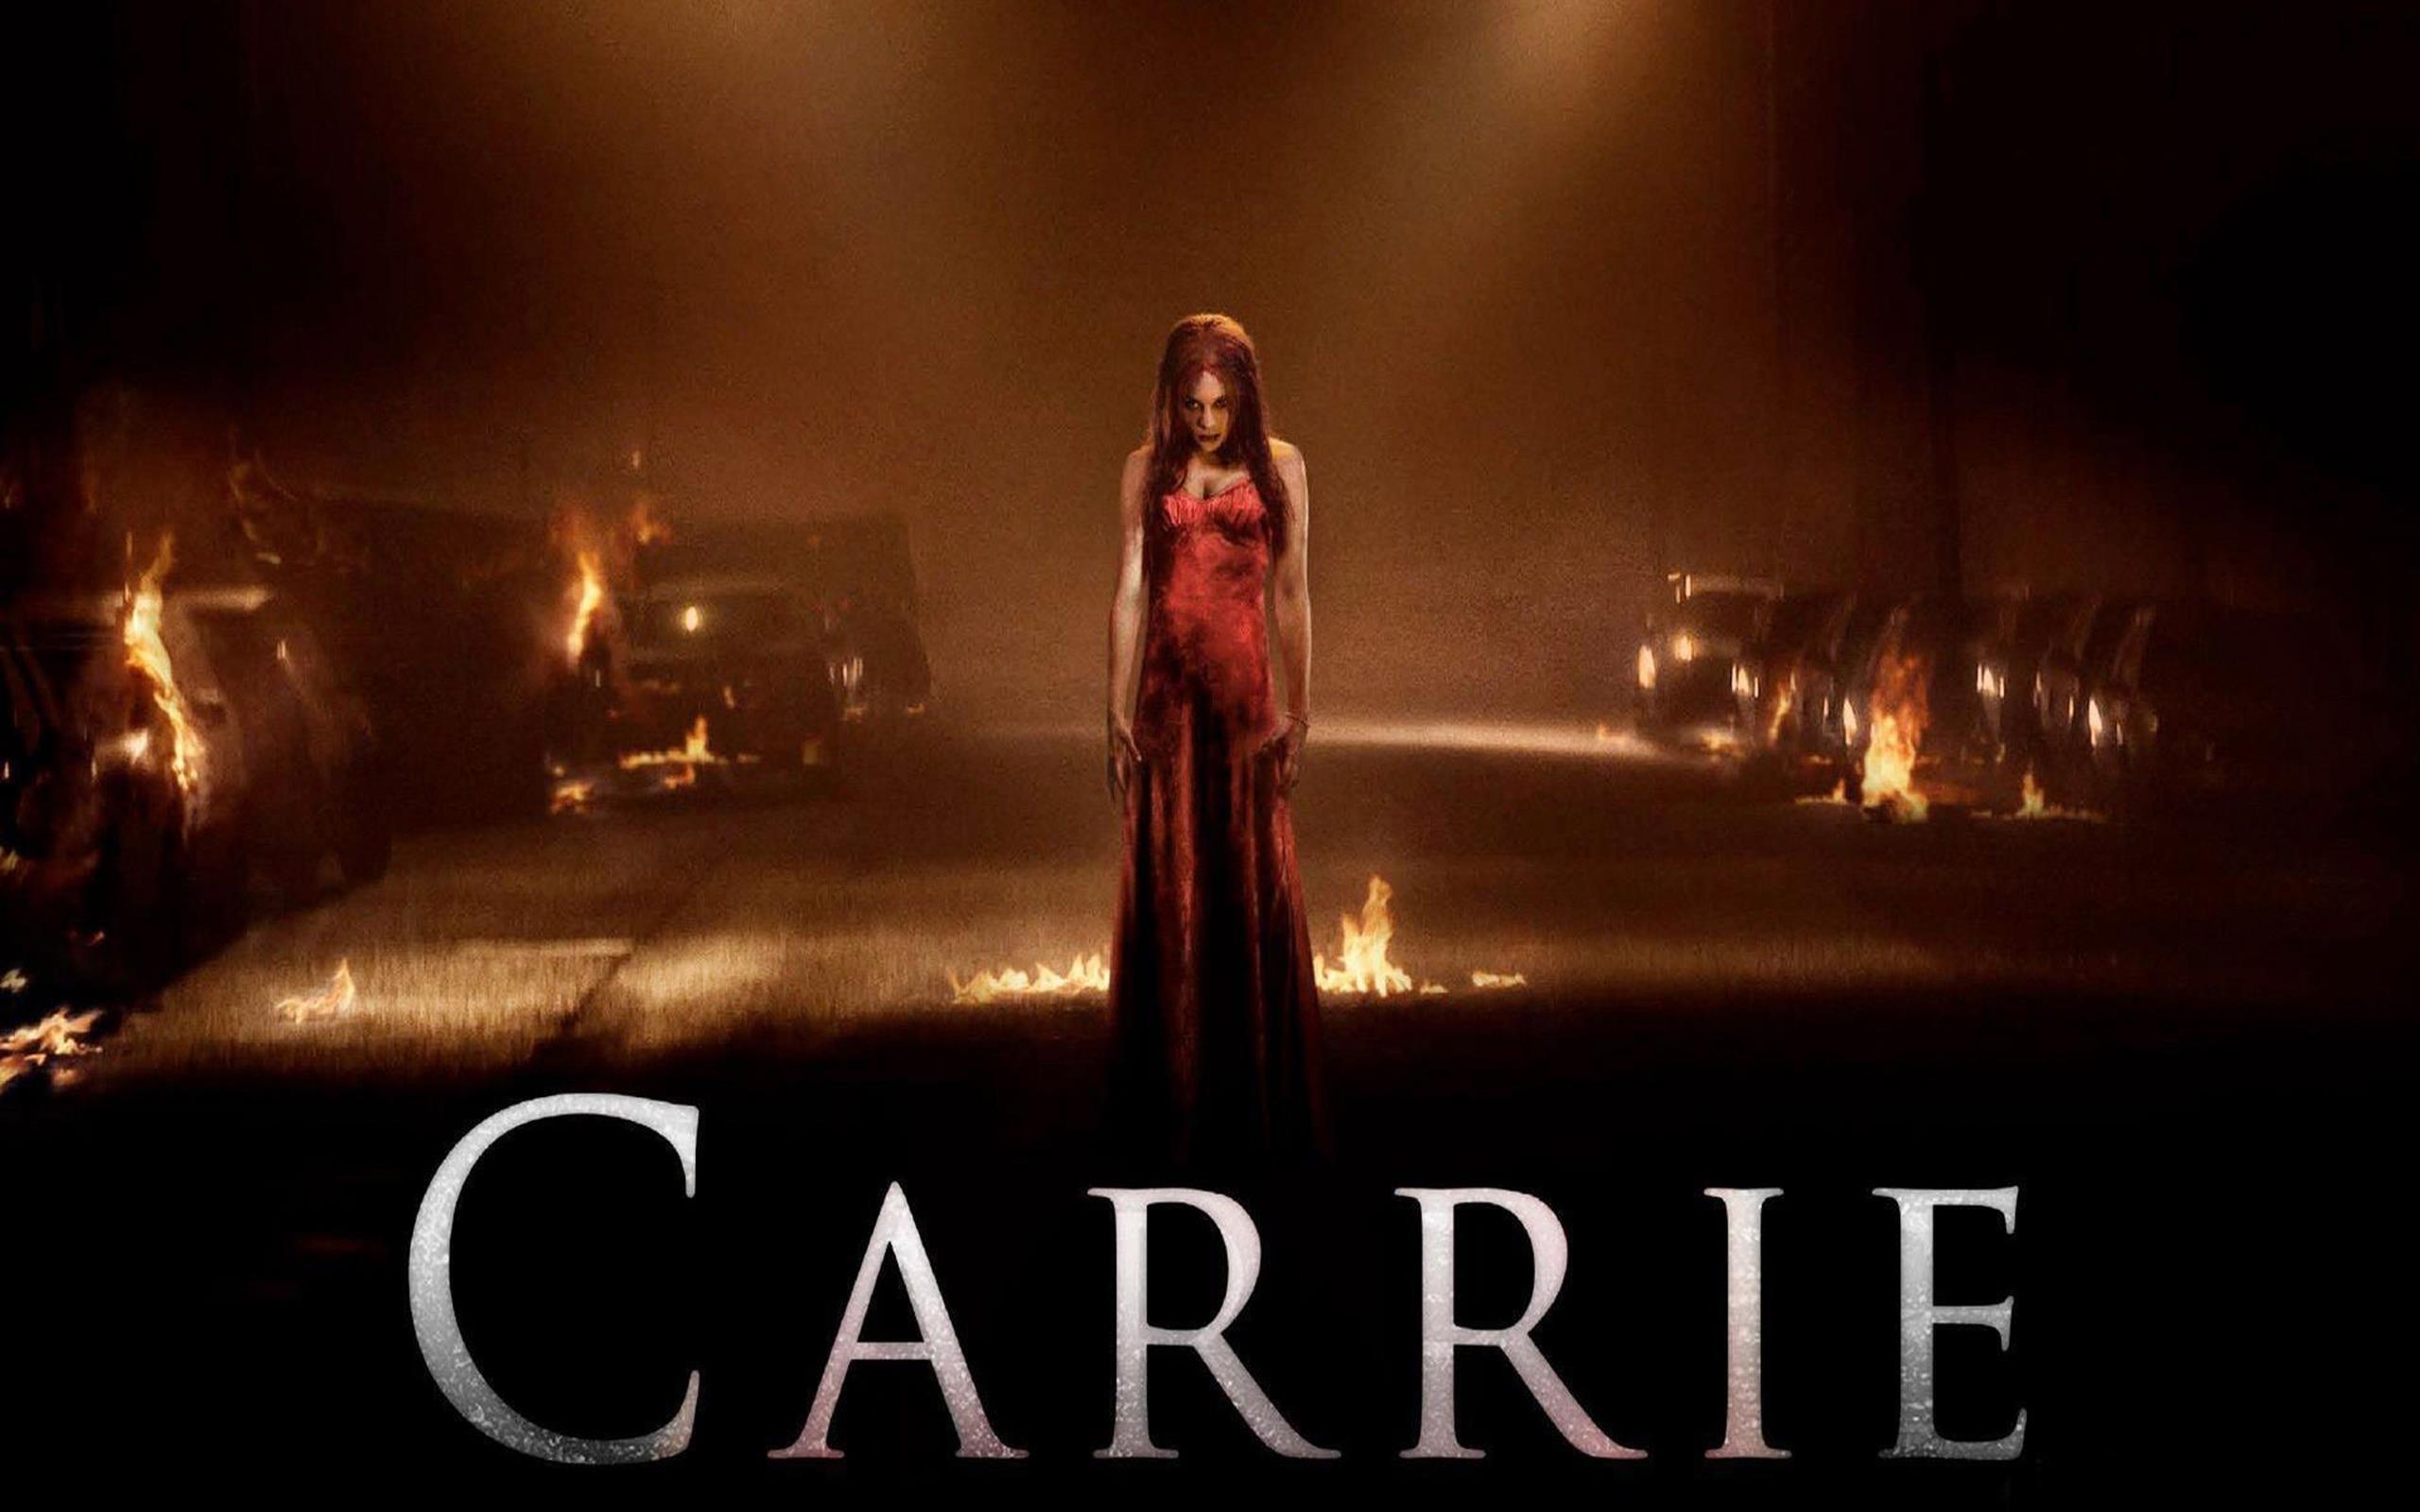 Carrie HD Wallpaper Image Picture Photo Download